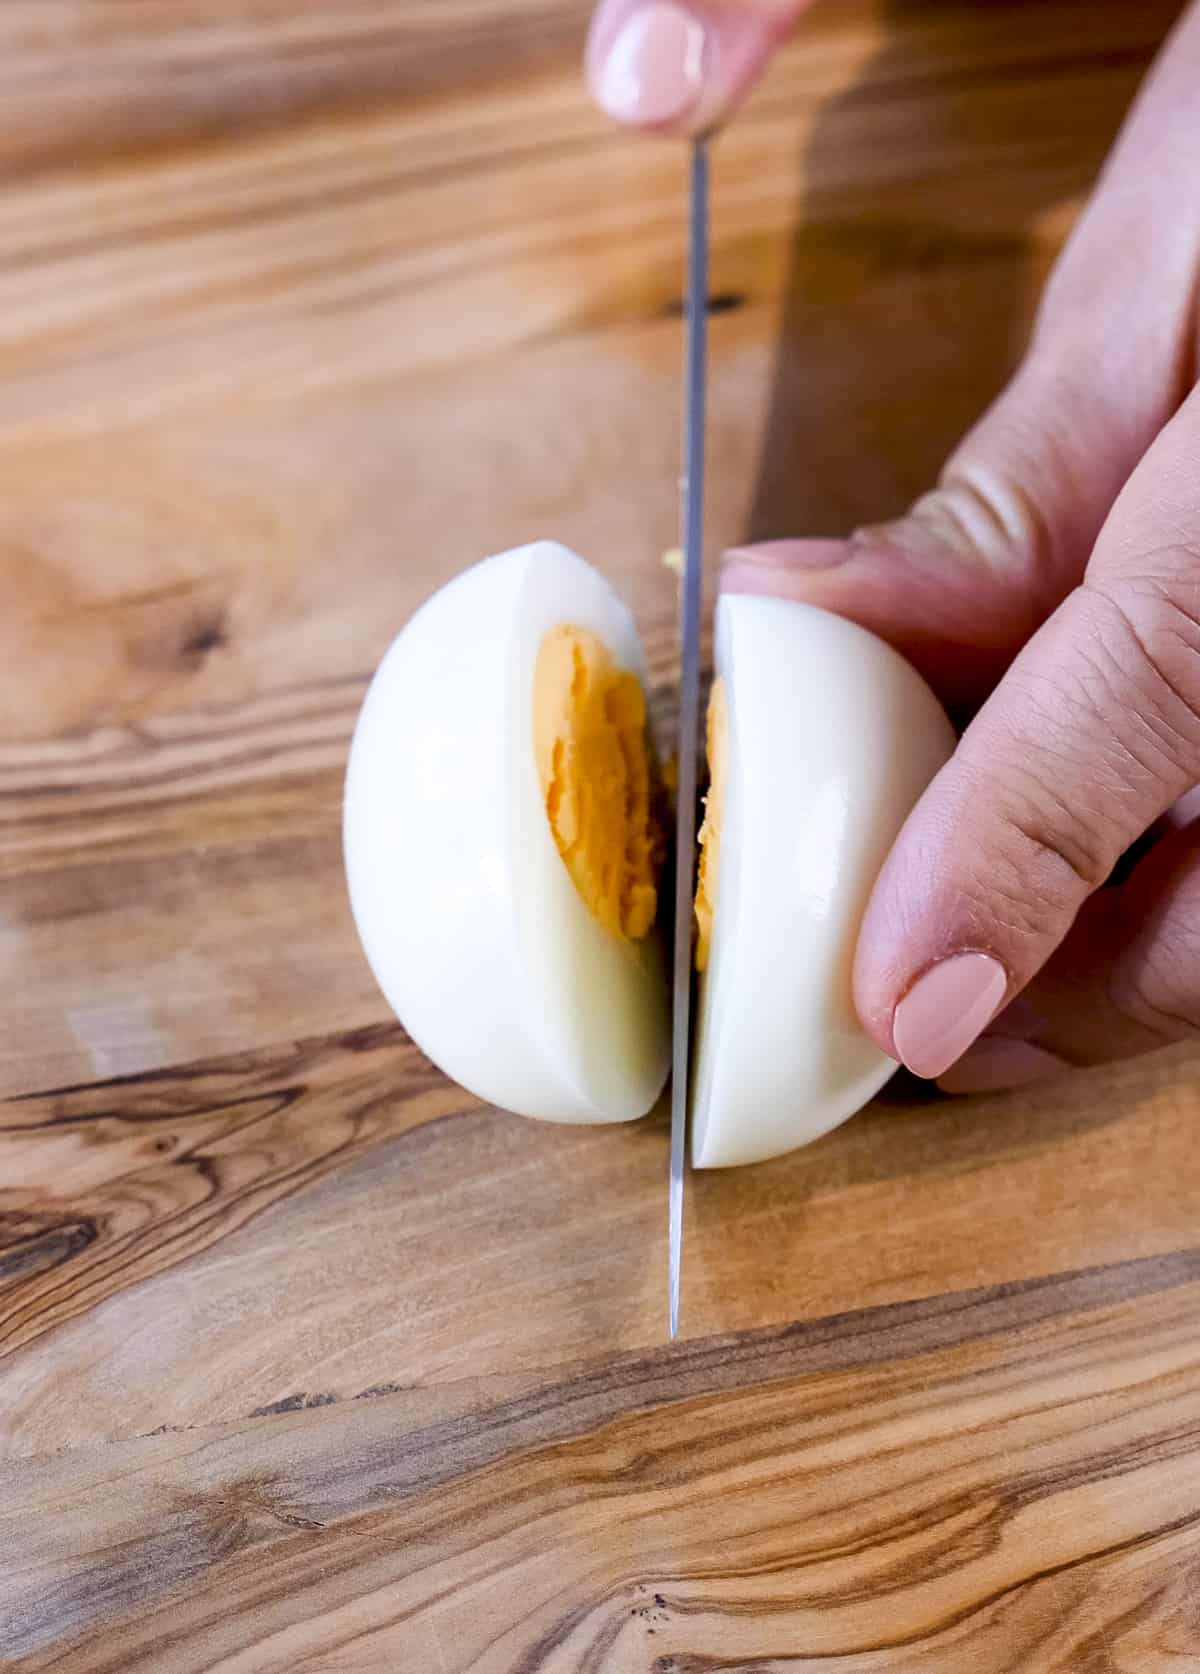 Hands cutting a hard boiled egg with a knife.